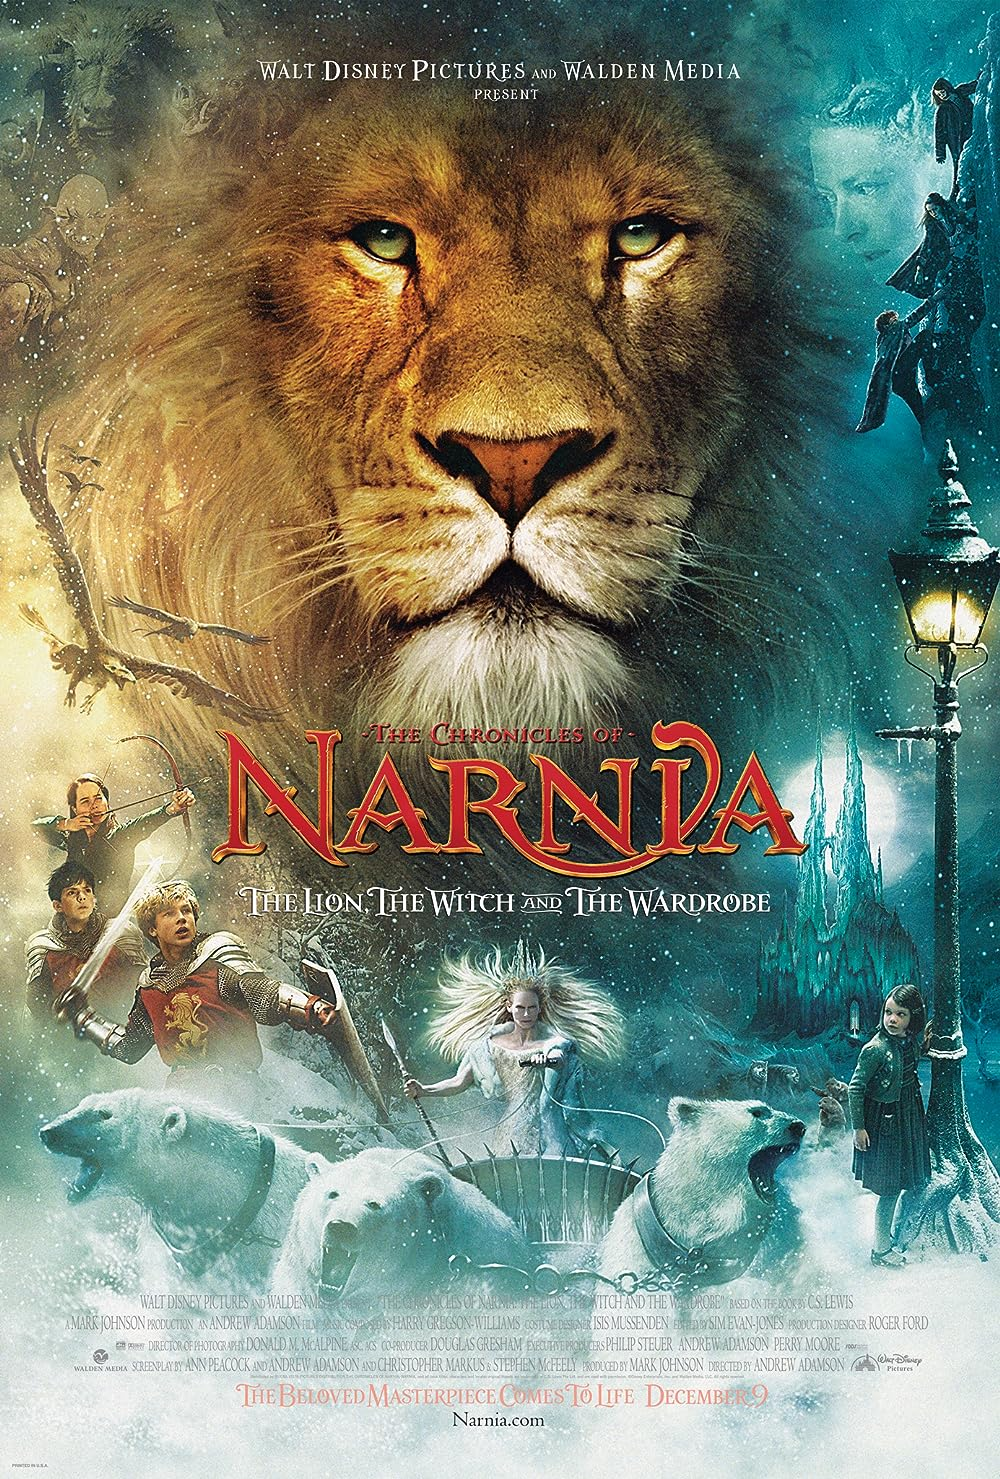 Best Christmas animated movies - The Chronicles of Narnia: The Lion, the Witch and the Wardrobe